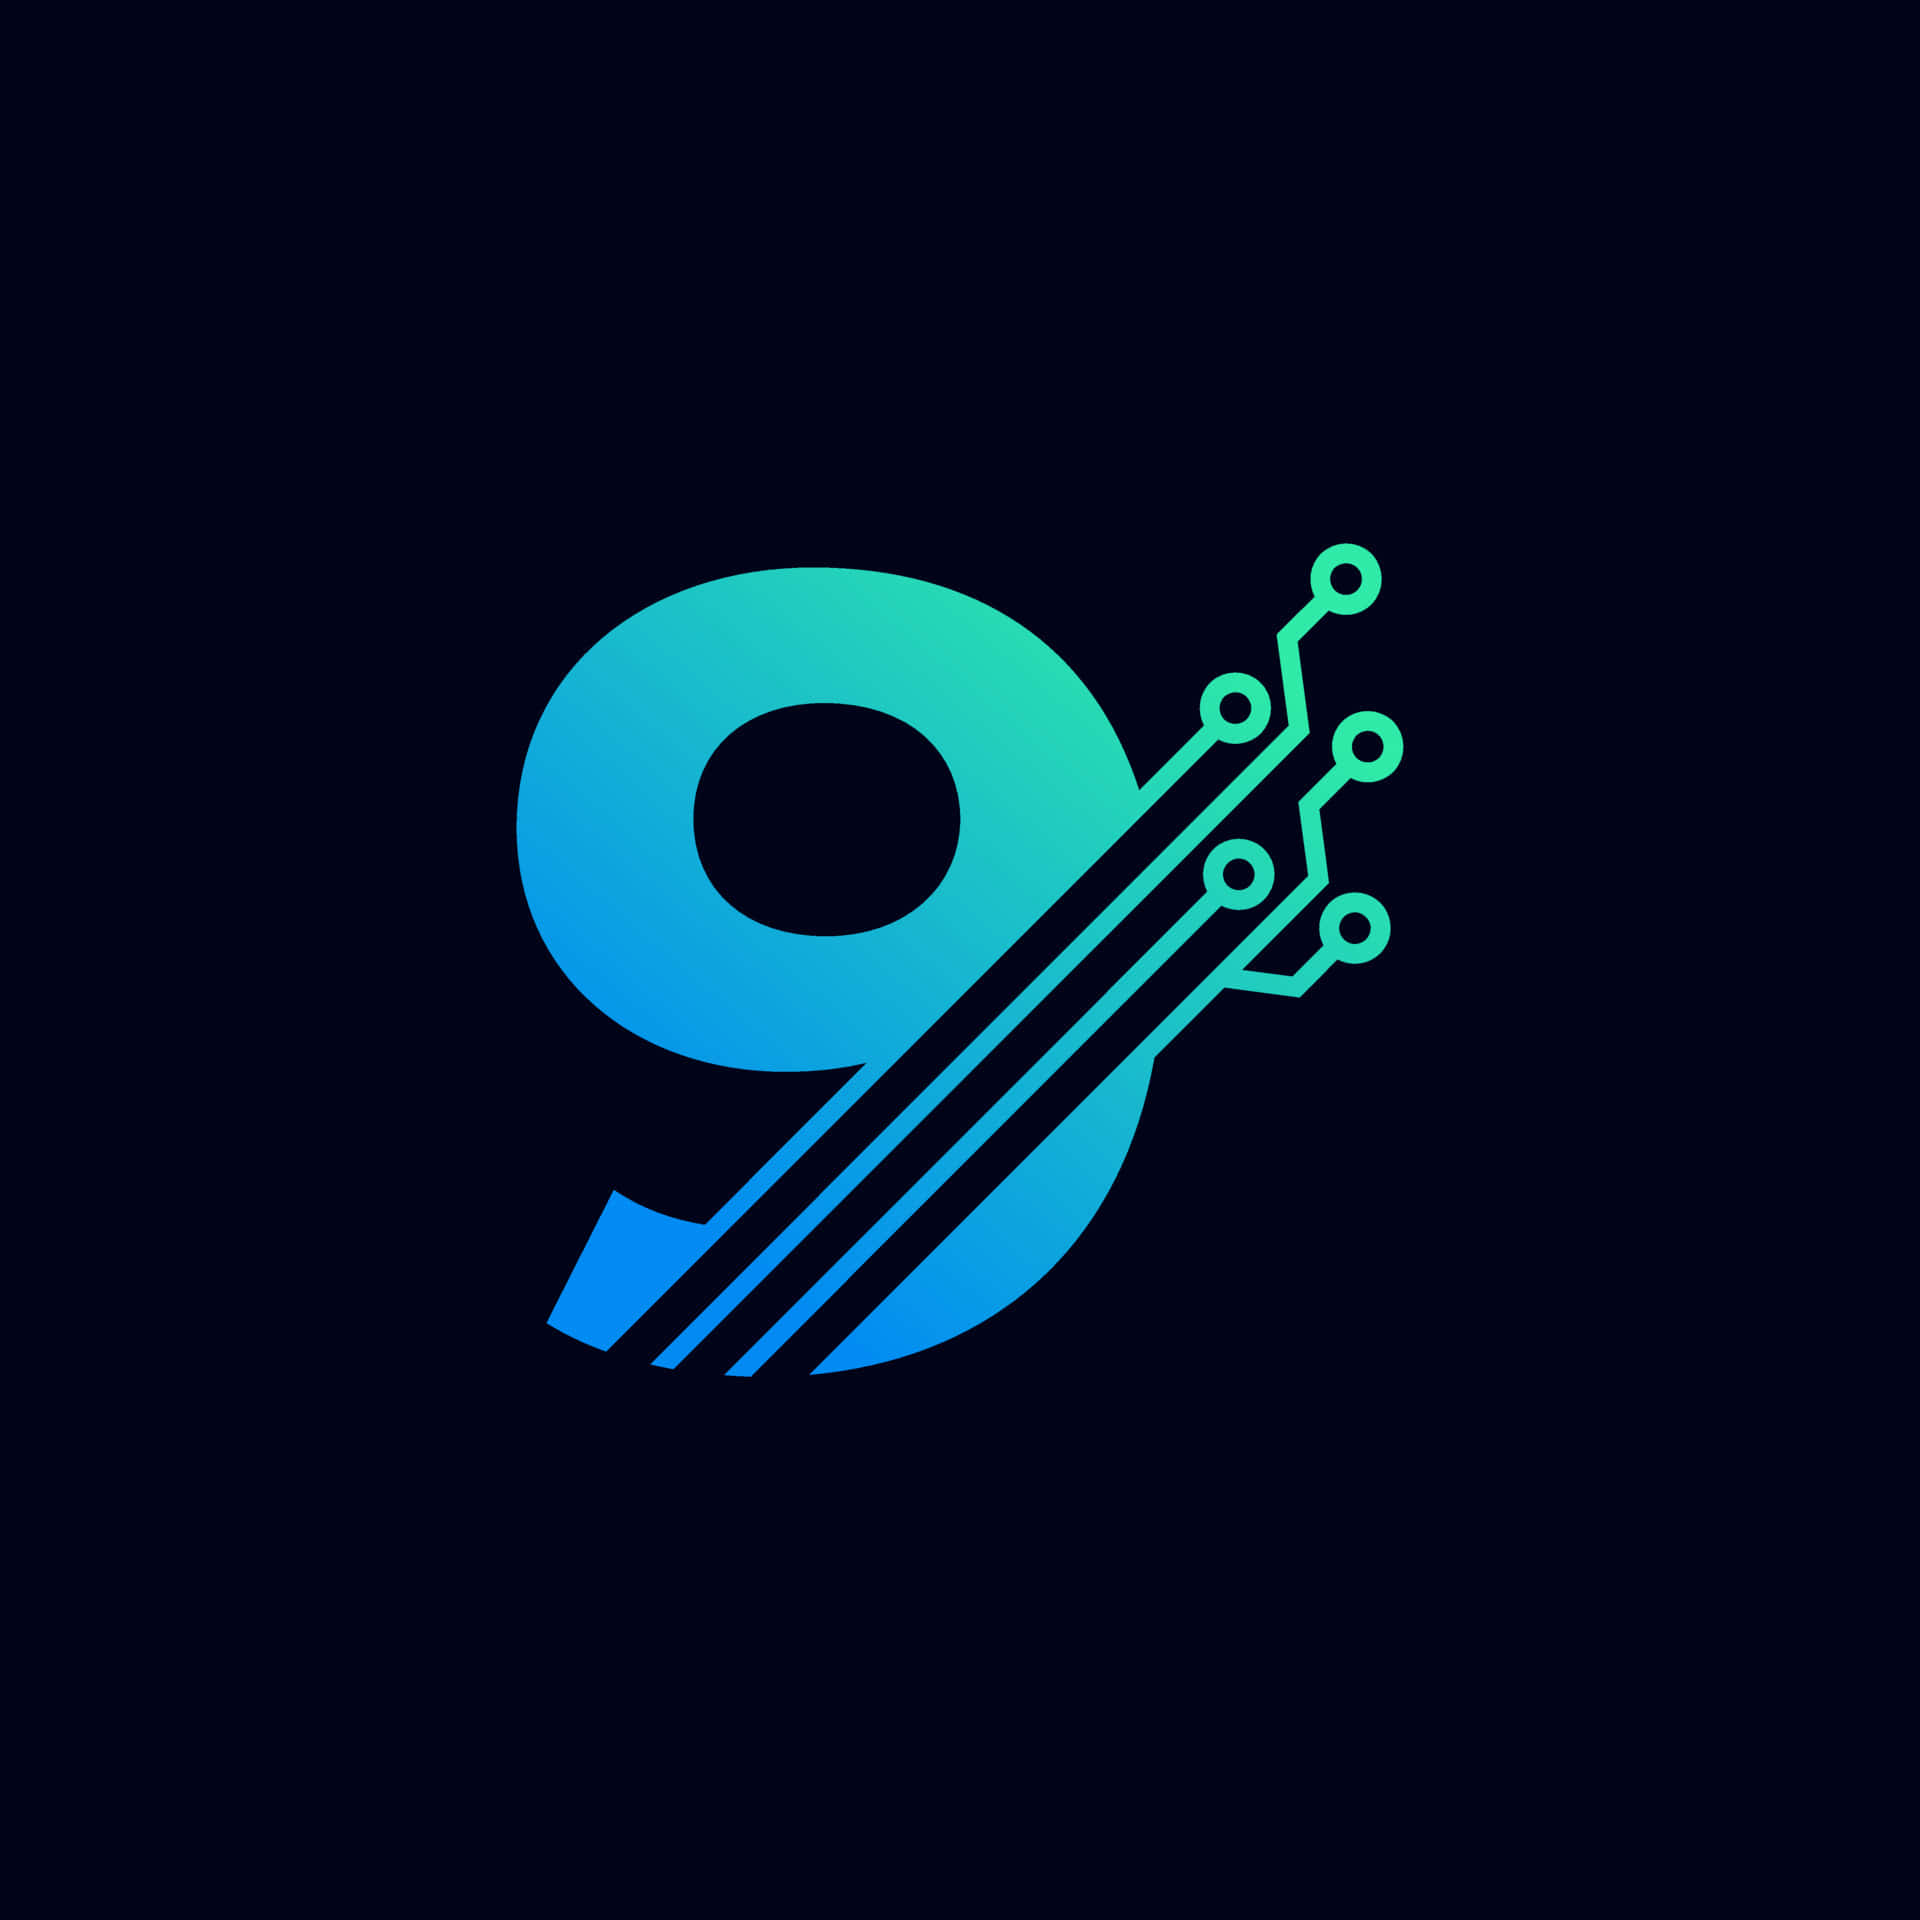 A Logo With The Number 9 On It Wallpaper